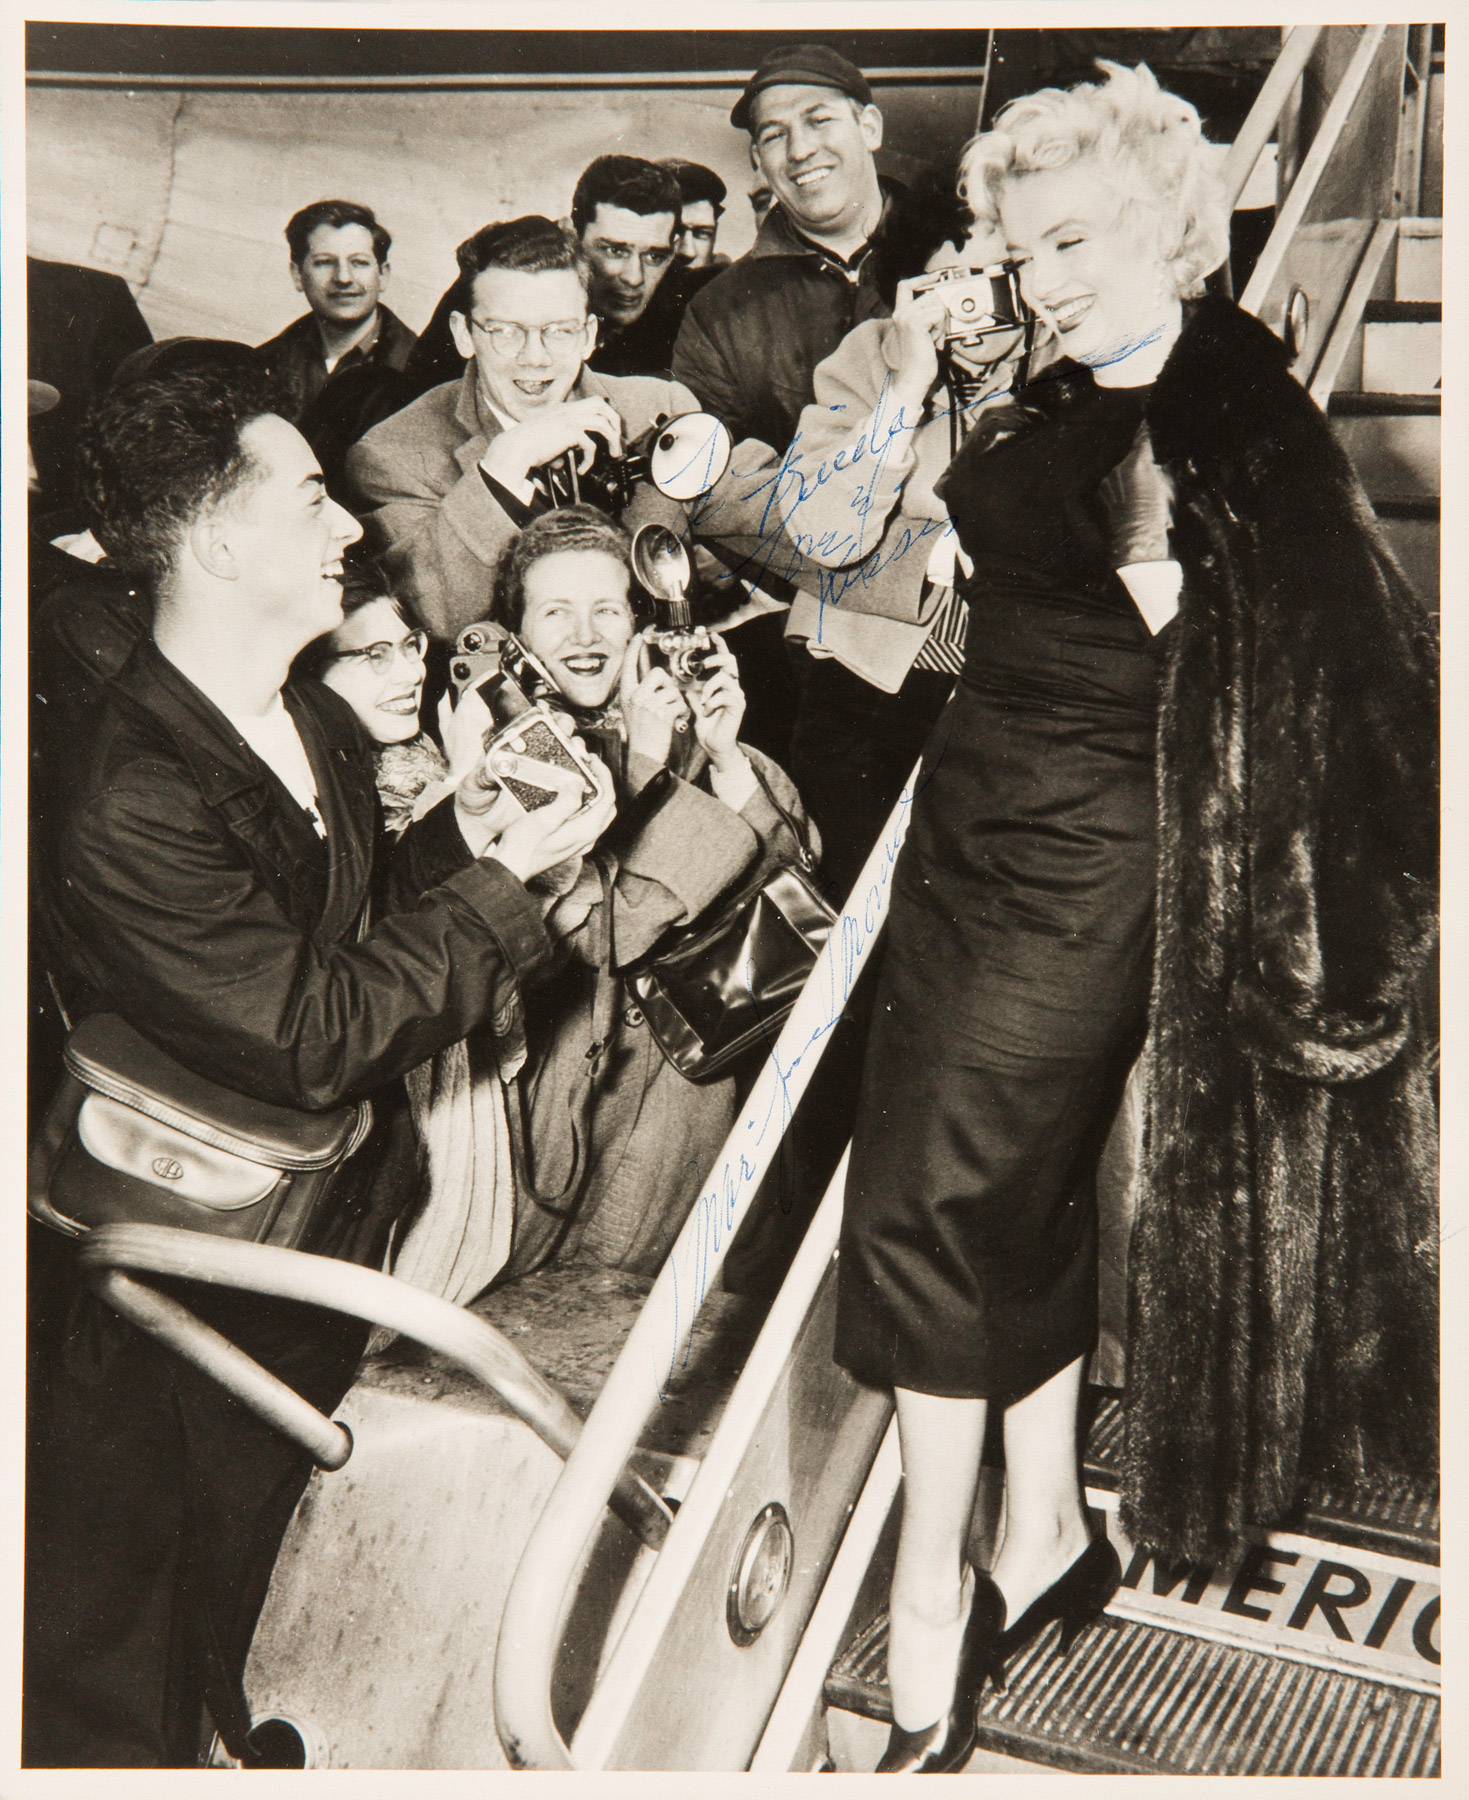 Marilyn Monroe as she boarded a plane for Hollywood at Idlewild Airport in New York on February 25, 1956.